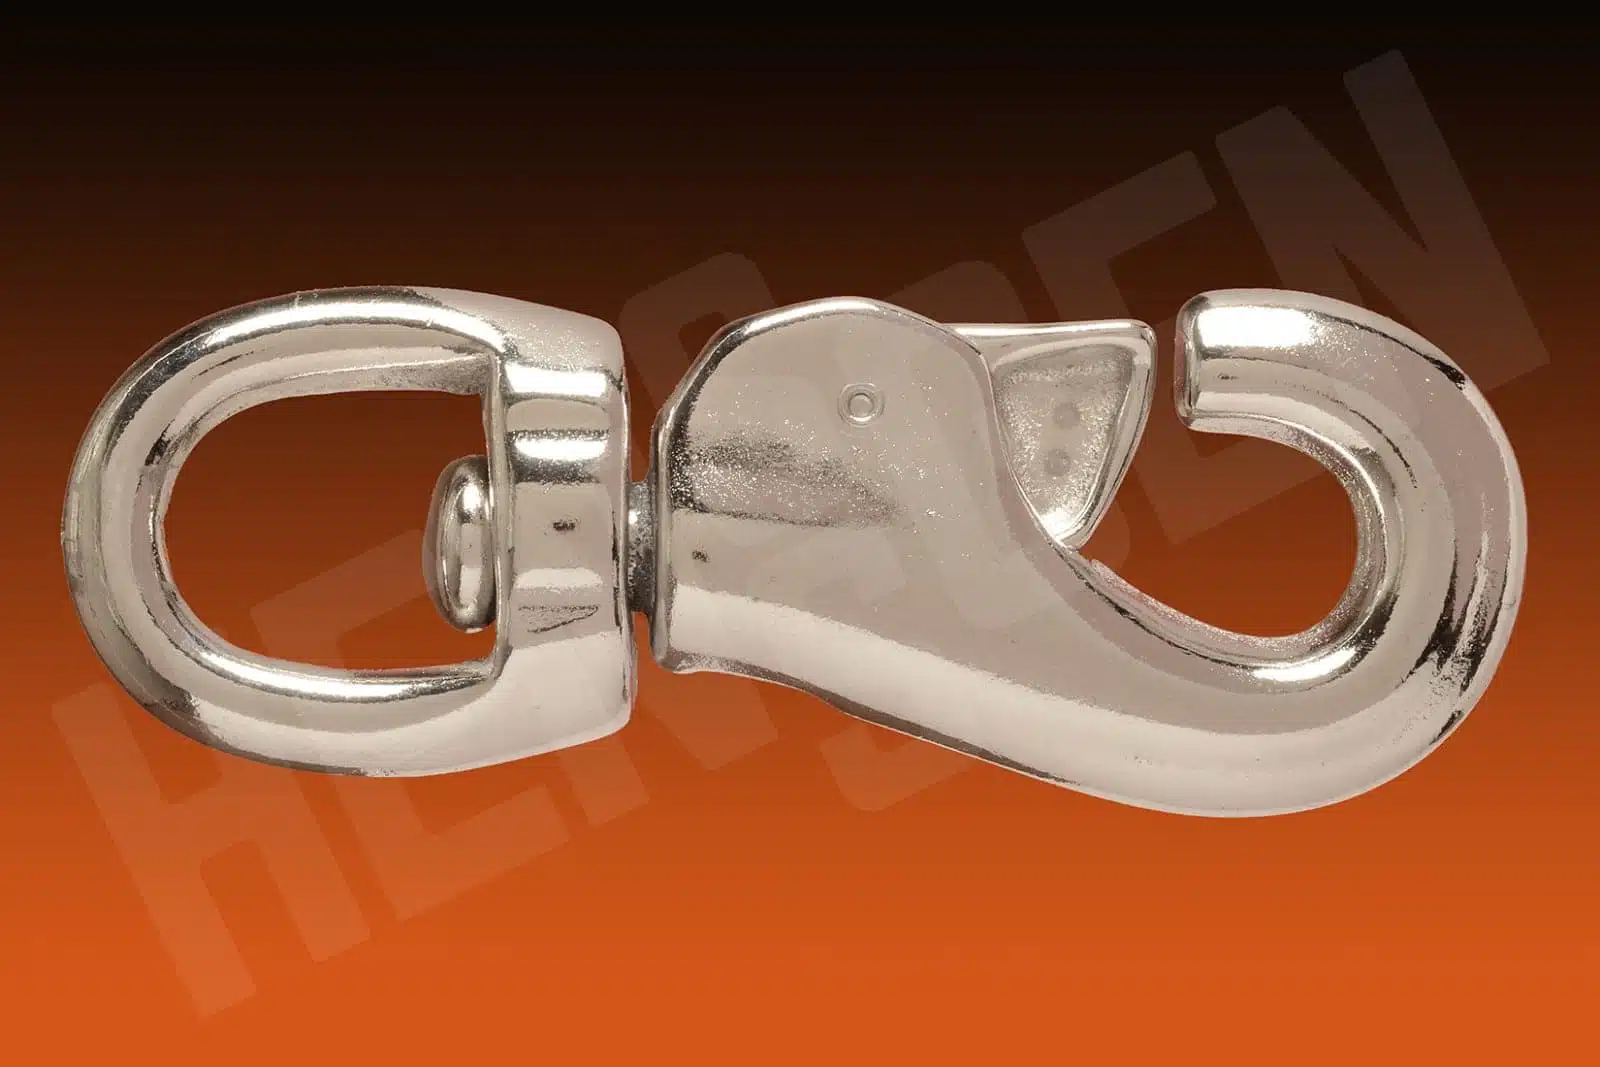 2 x 5mm Snap Hook Two Snap Hooks Zinc Plated For Chains And Ropes Securit 